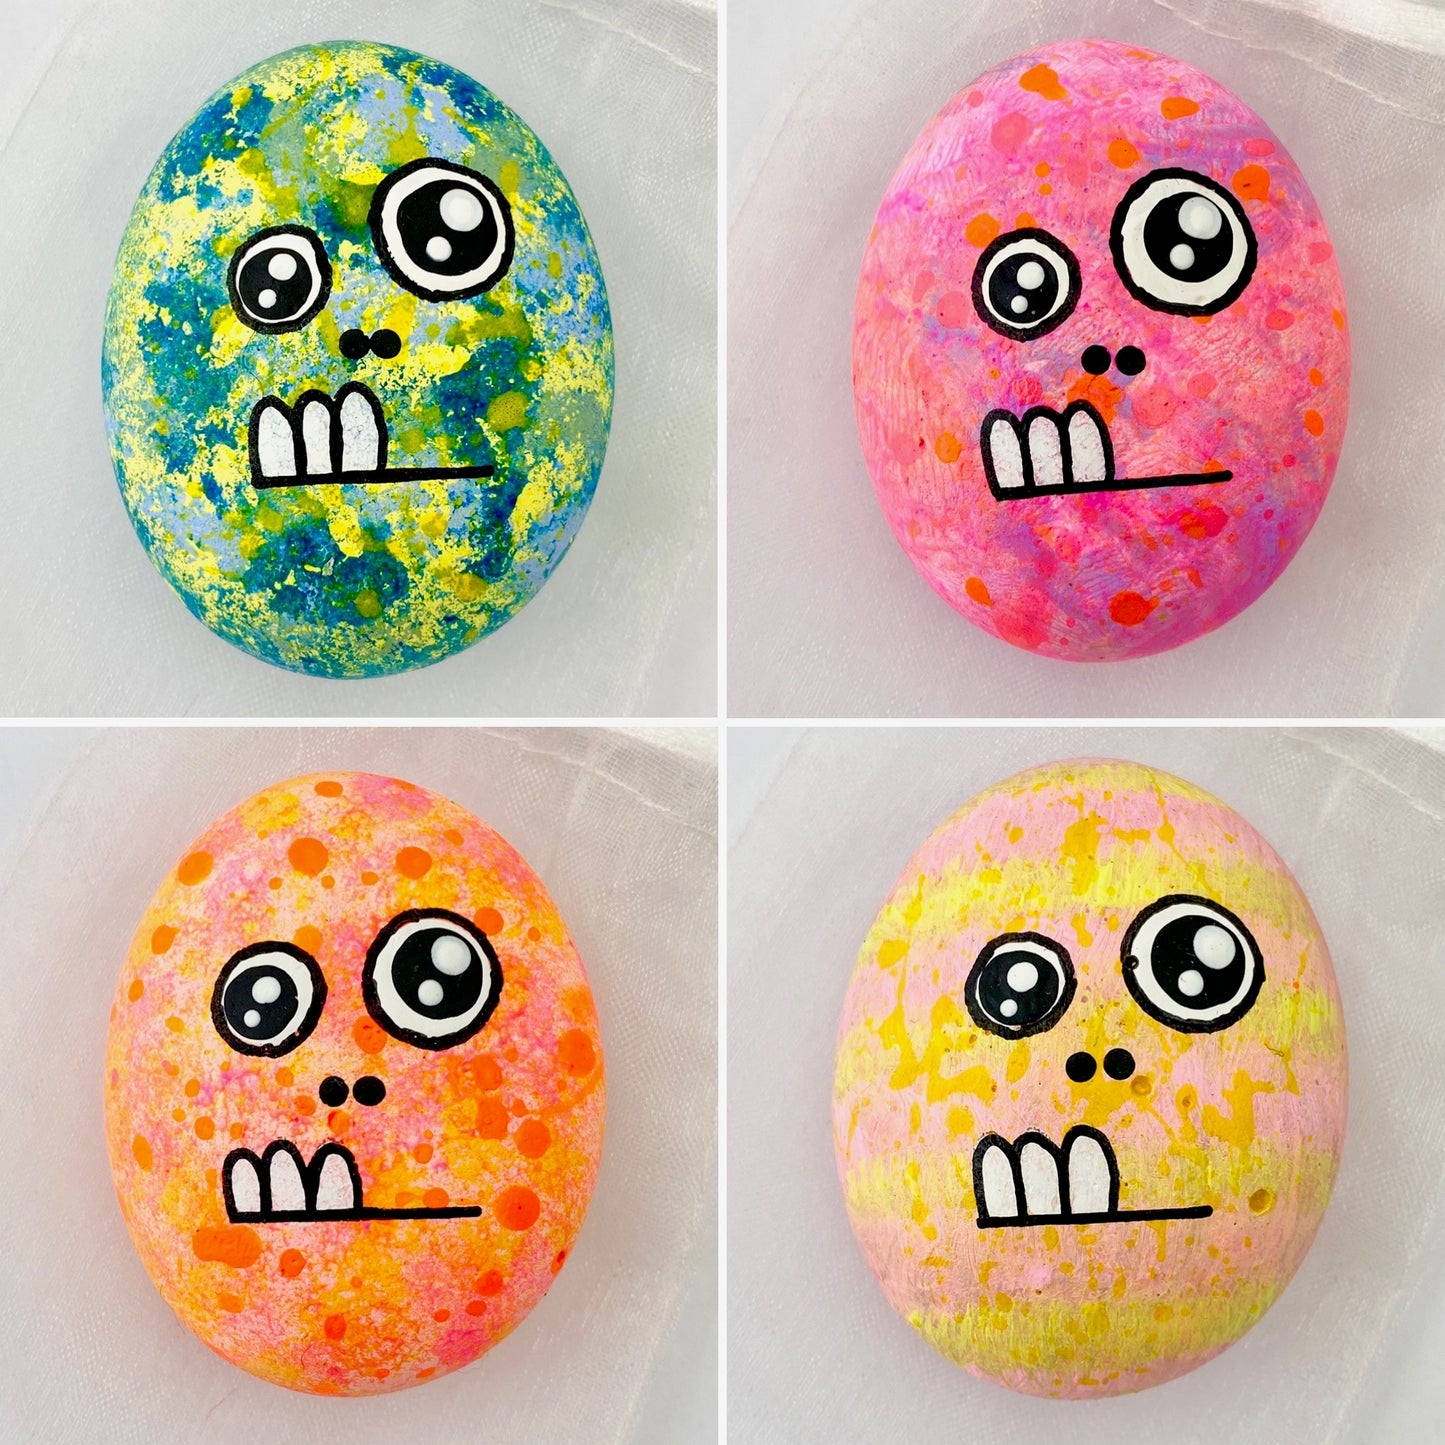 Hand painted 2 eyed monster pebbles called Flomp in 4 different colour ways